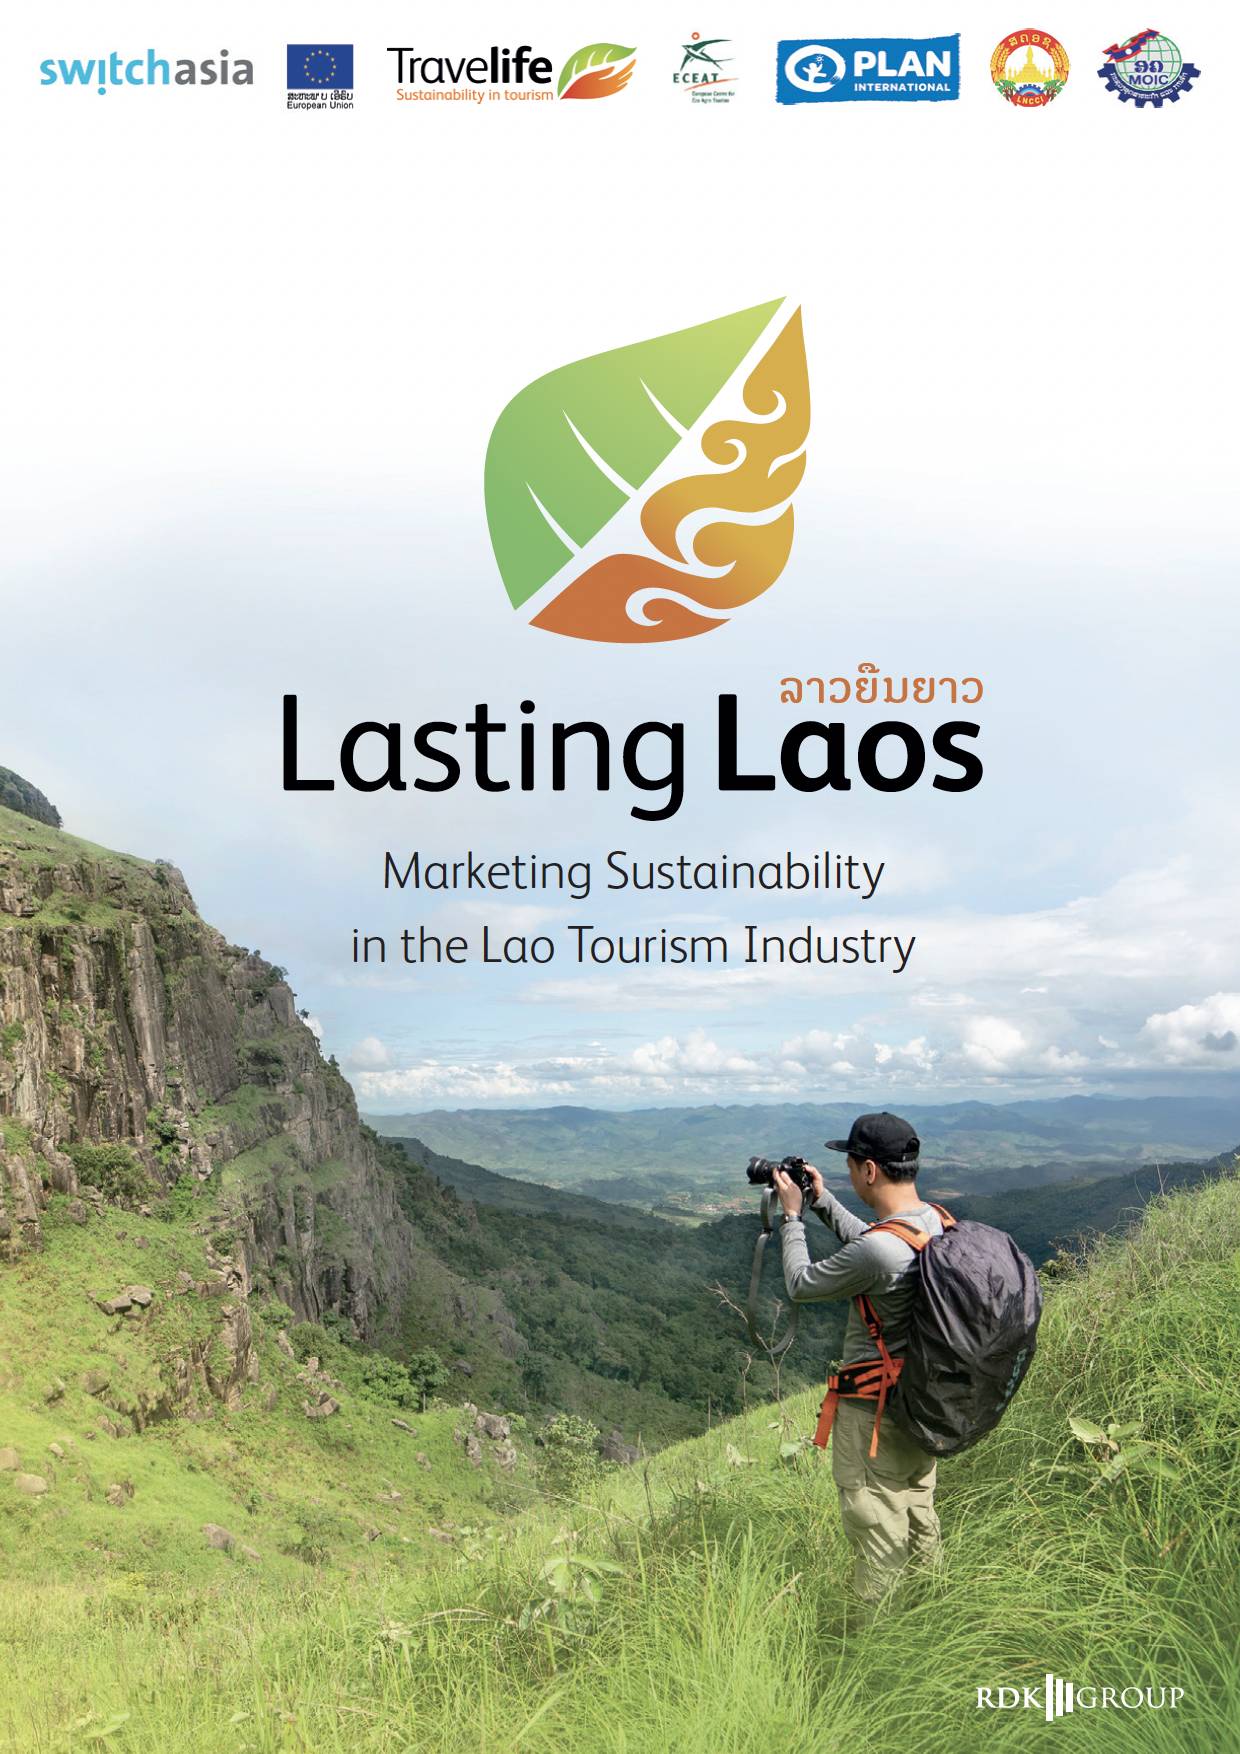 Marketing Sustainability in the Lao Tourism Industry